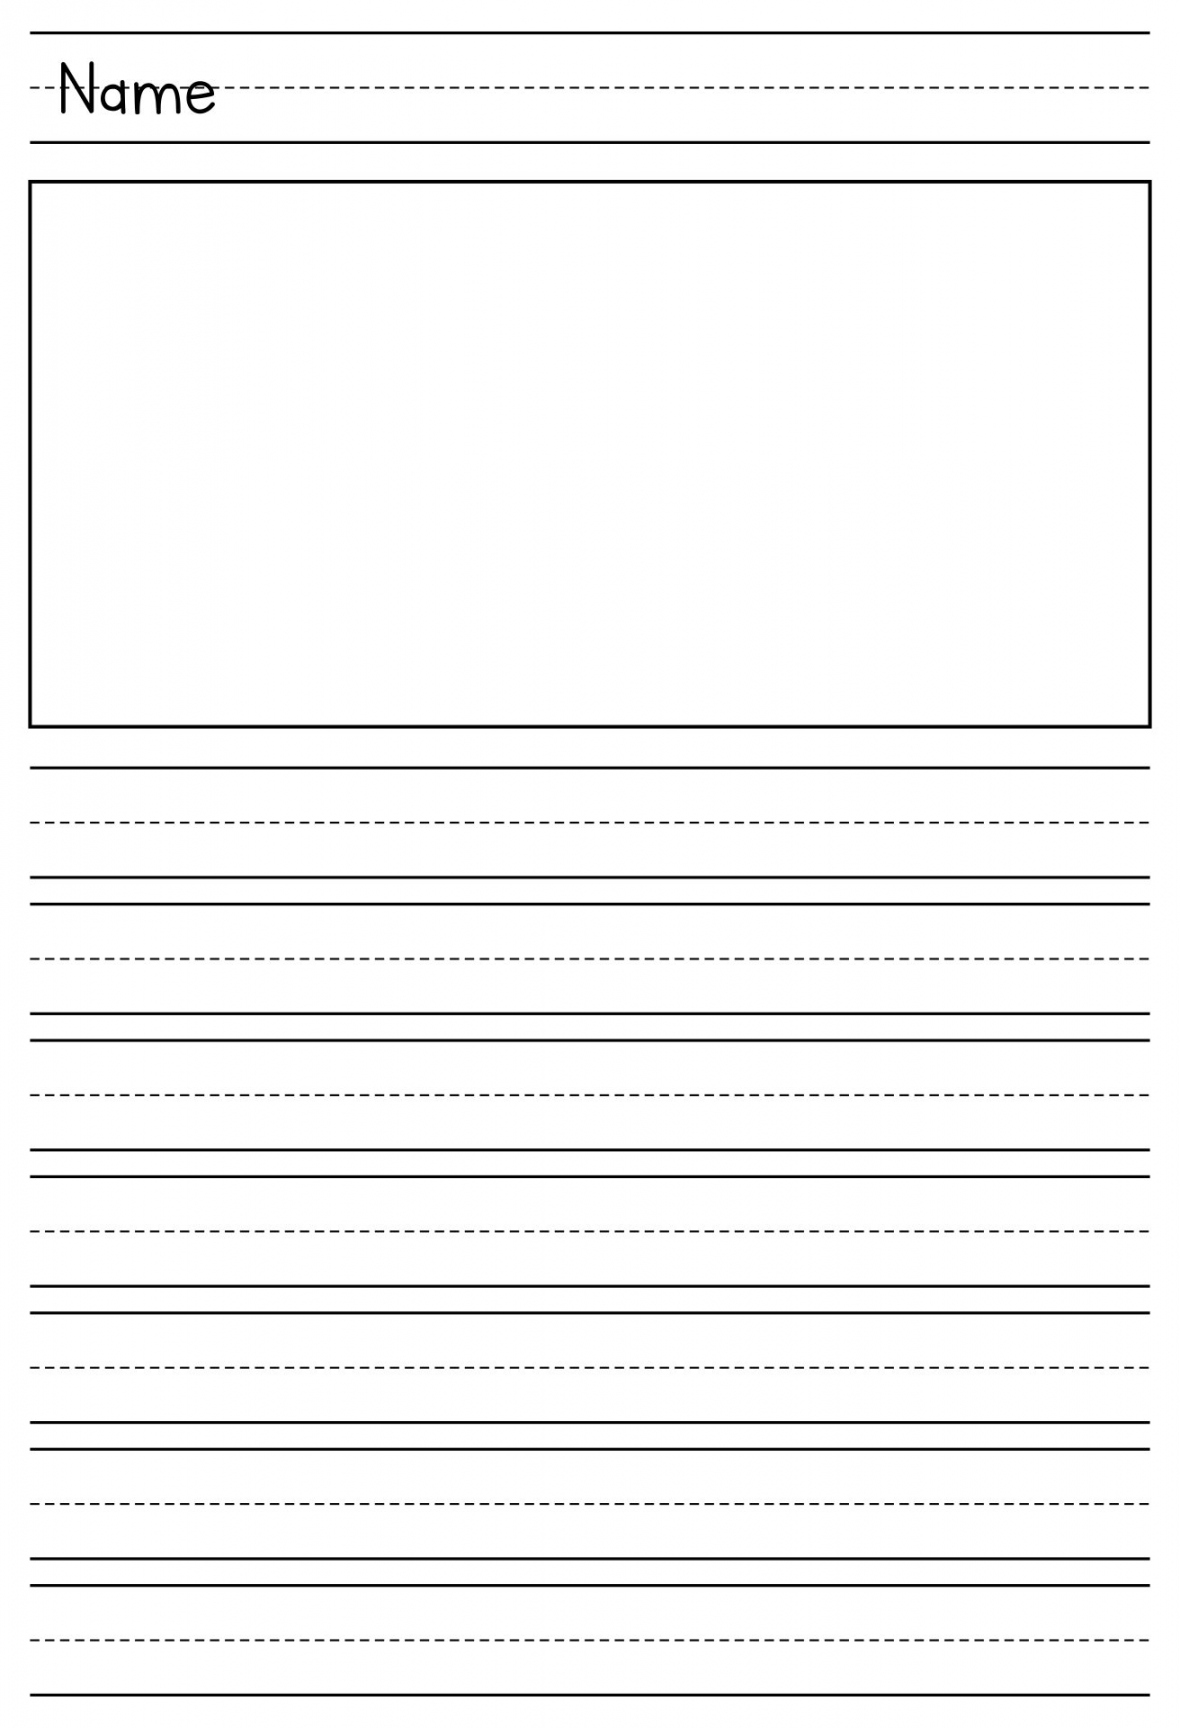 Best Printable Primary Writing Paper Template - printablee - Free Writing Paper